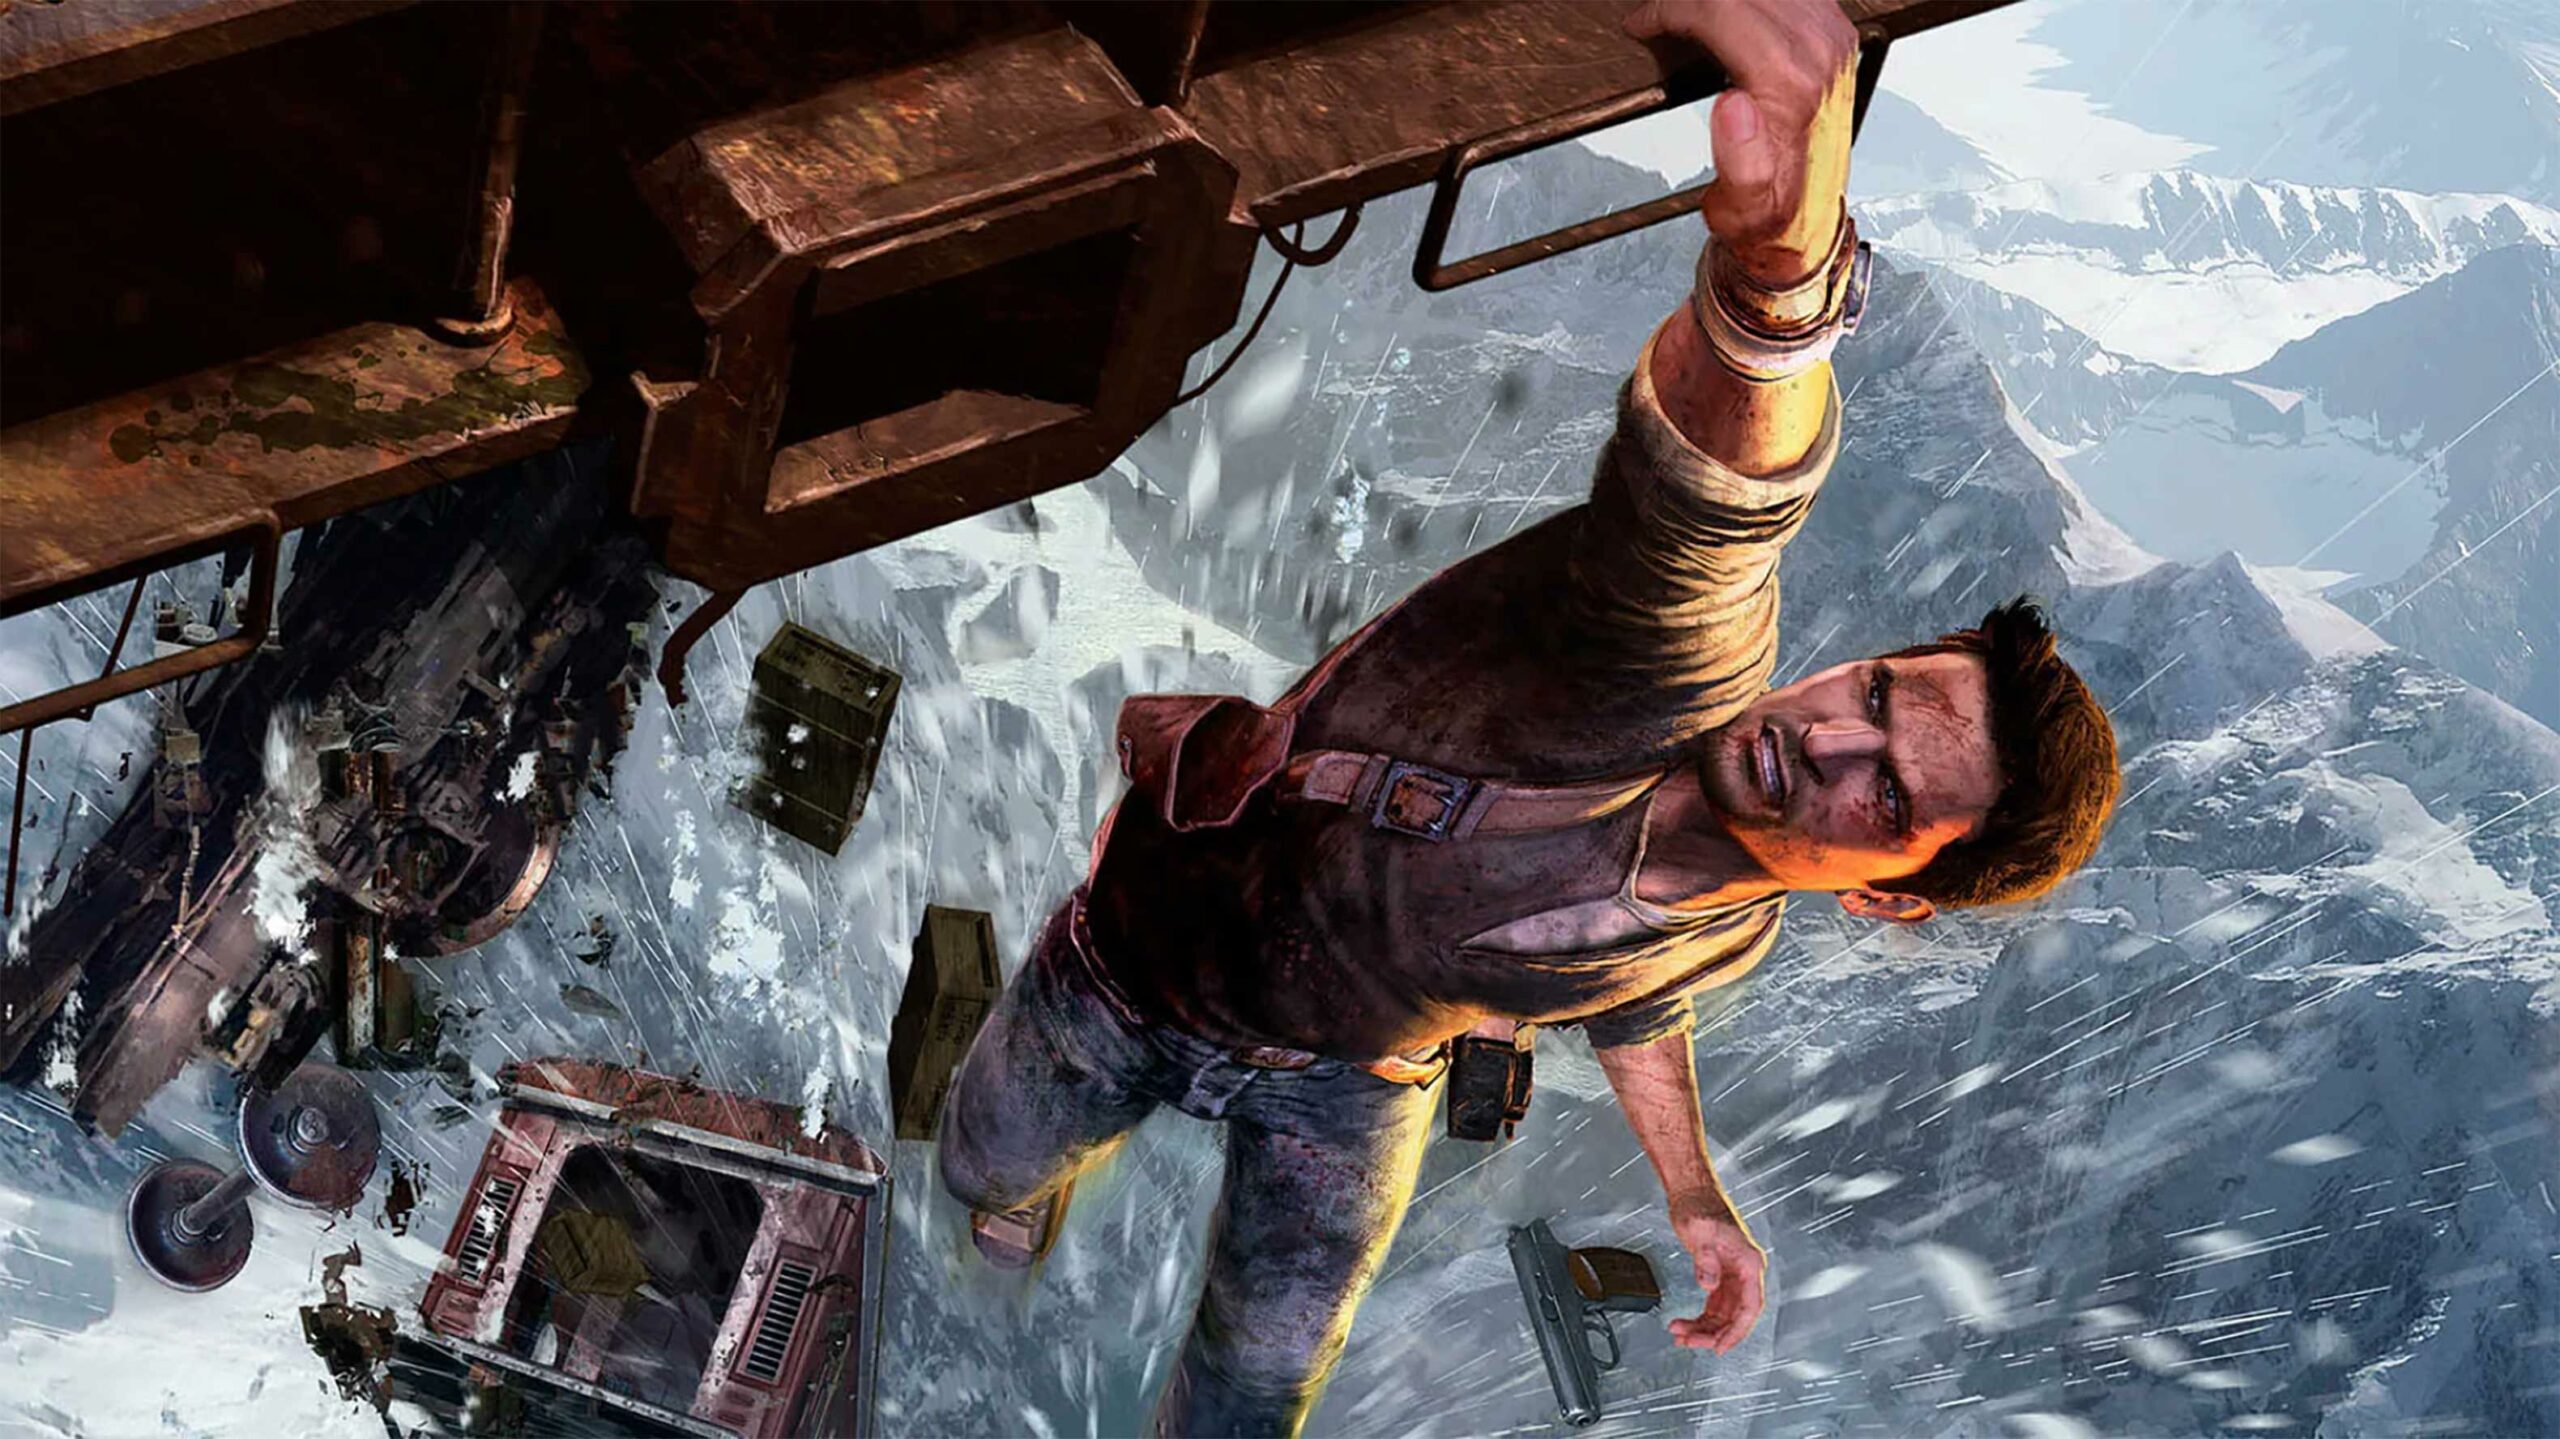 Uncharted 2 cover art